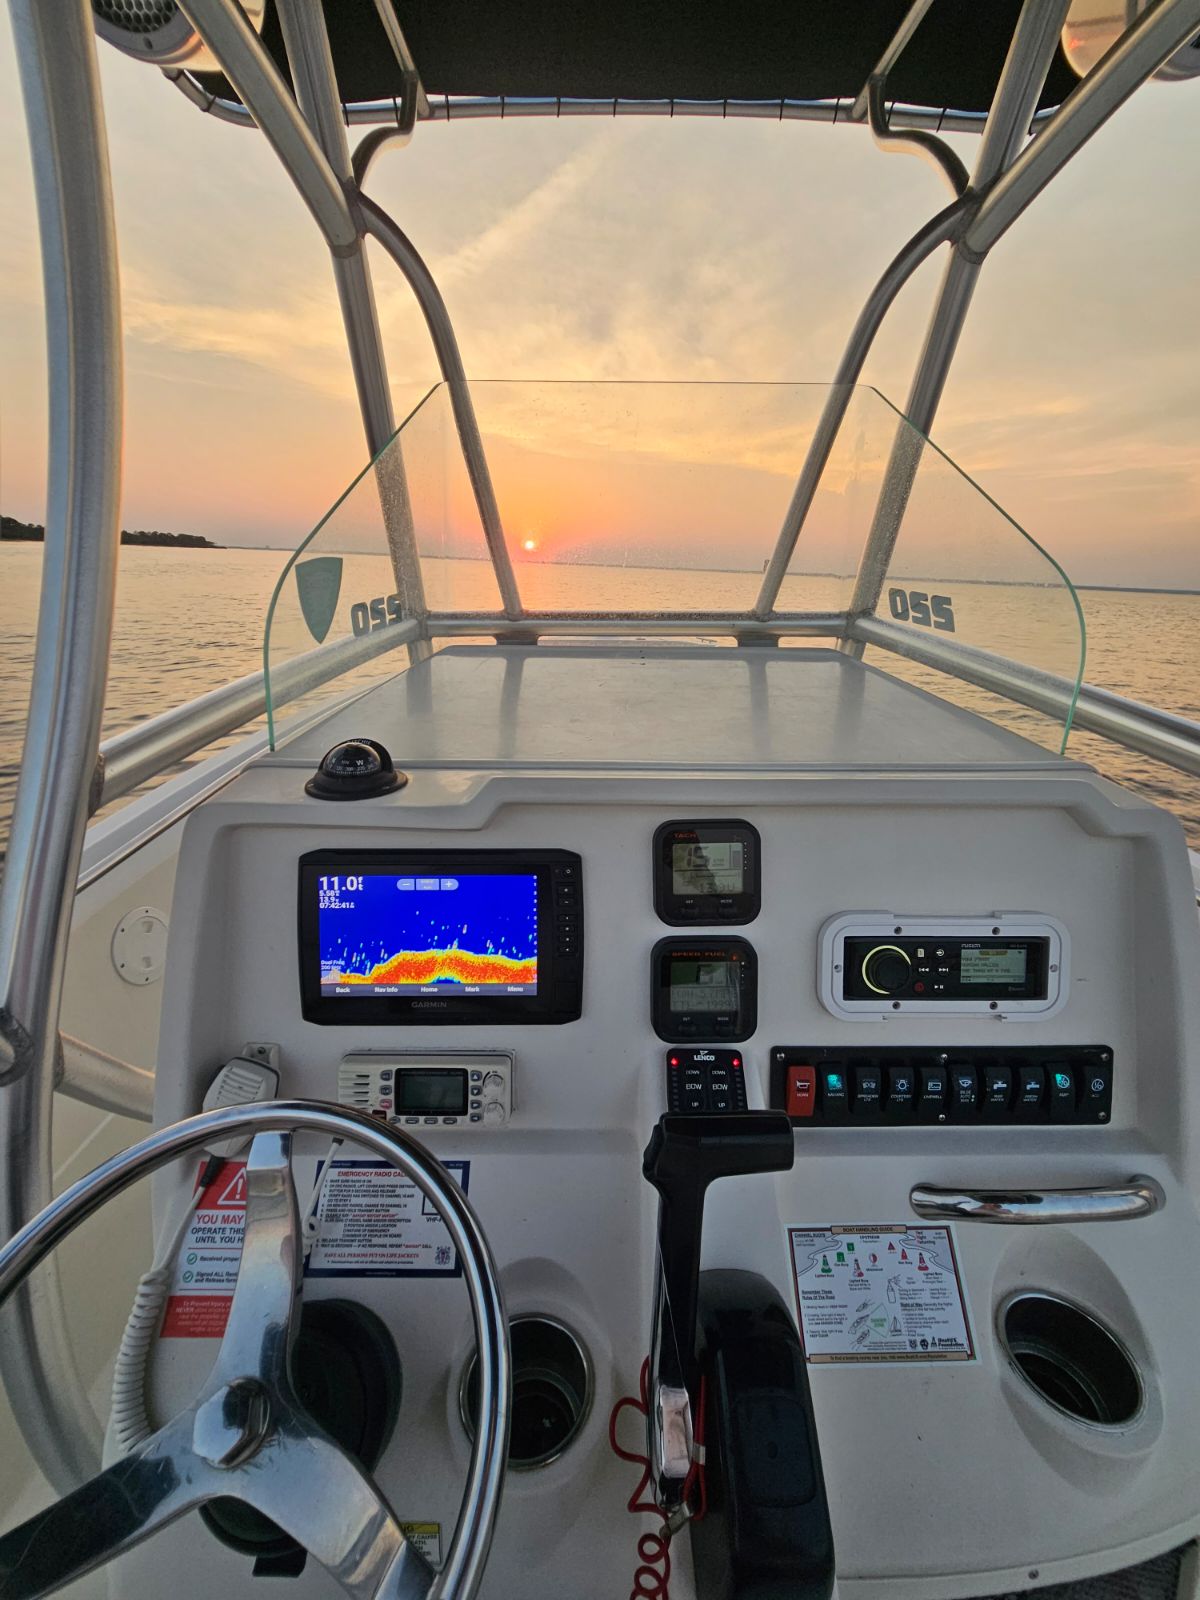 steering controls of a center console boat with sunset in the background